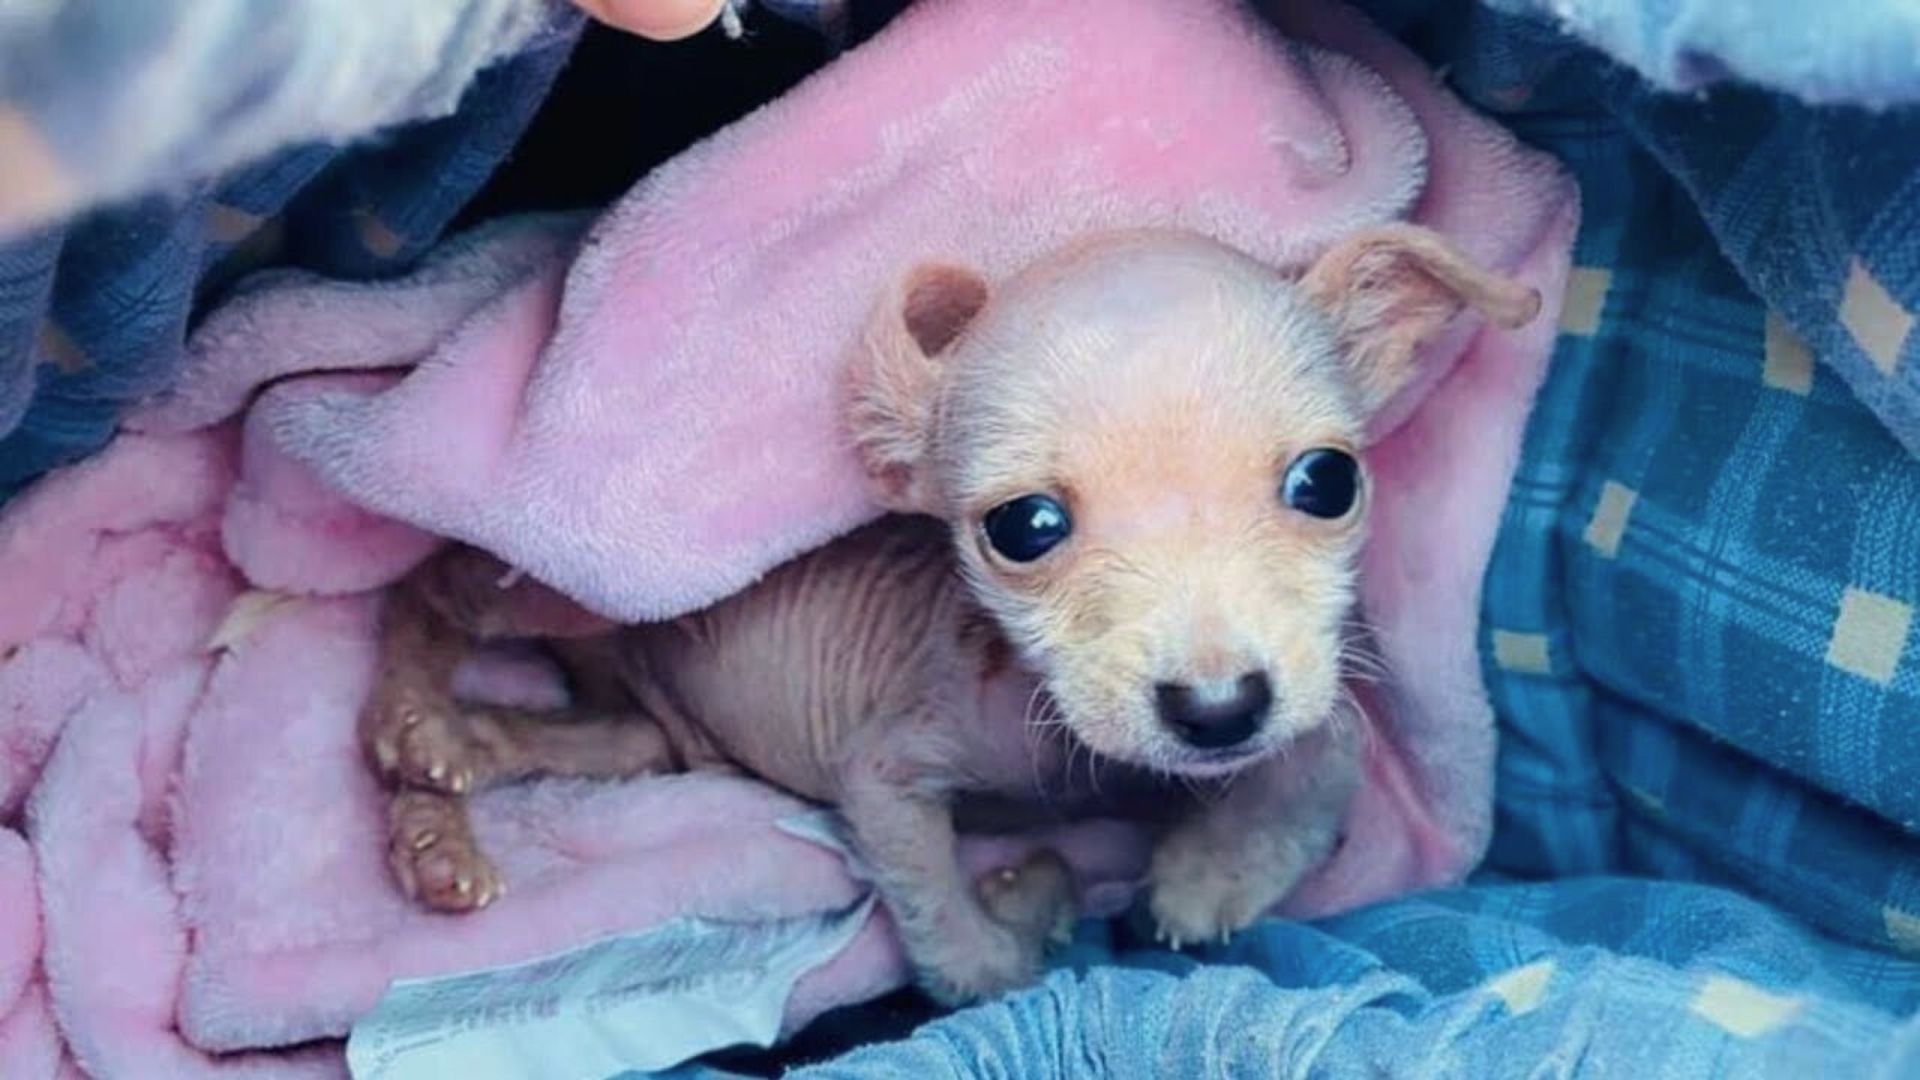 Disabled Pup Who Weighed Only 1 Pound Became The Most Playful Pup All Thanks To His Rescuer